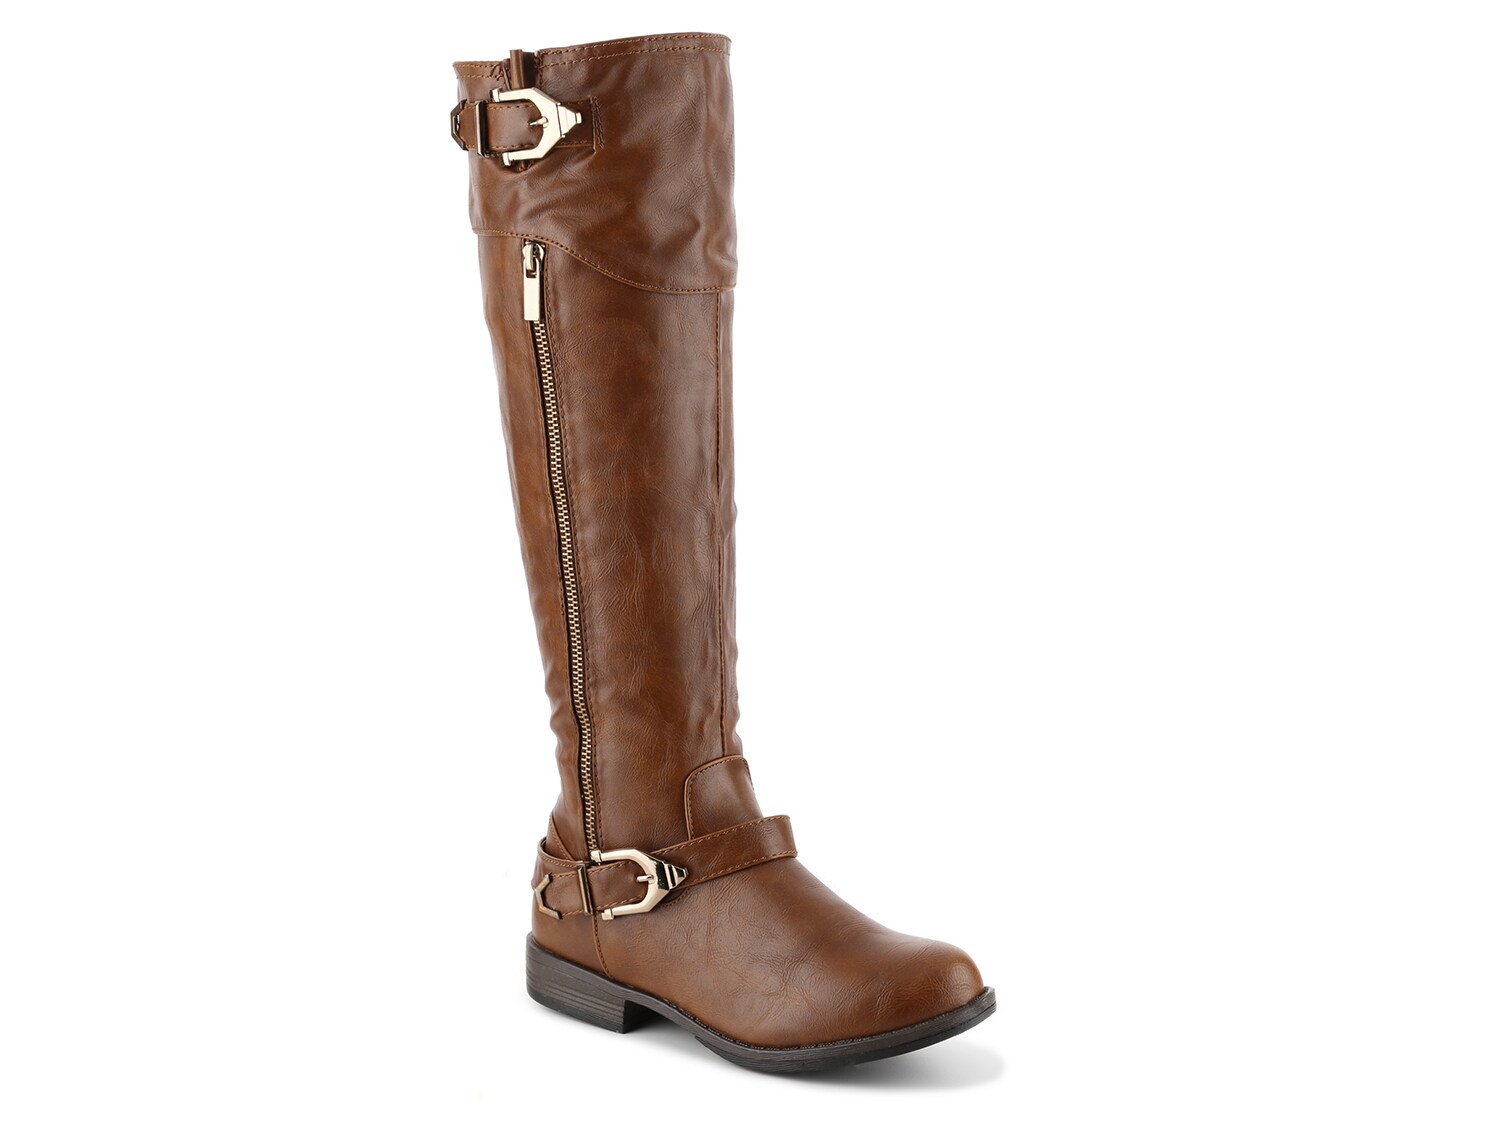 Journee Collection Barb Riding Boot - Free Shipping | DSW